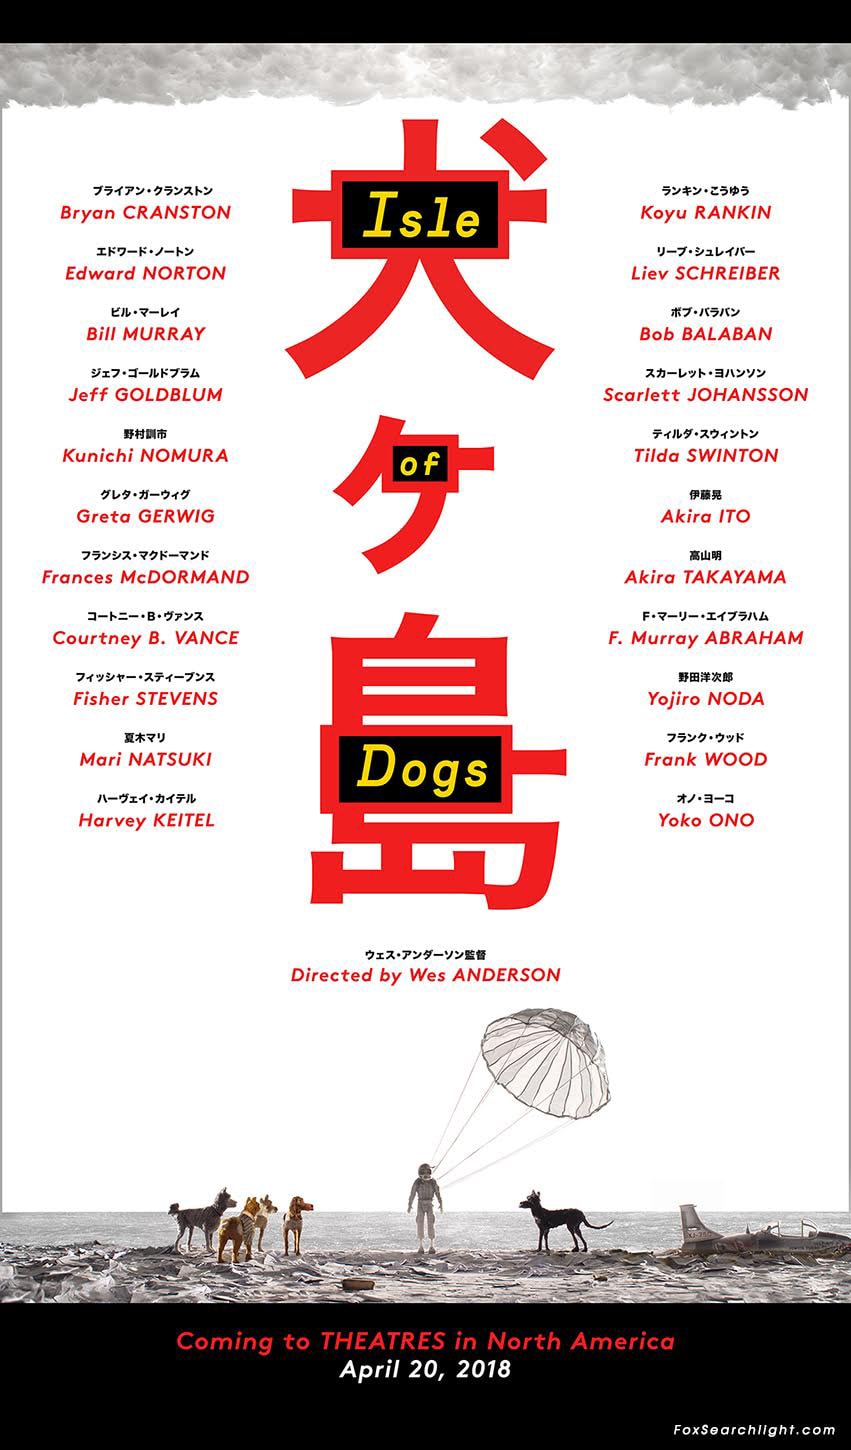 Wes Anderson 'Isle of Dogs' Release Date Movies Film Cinema Motion Picture